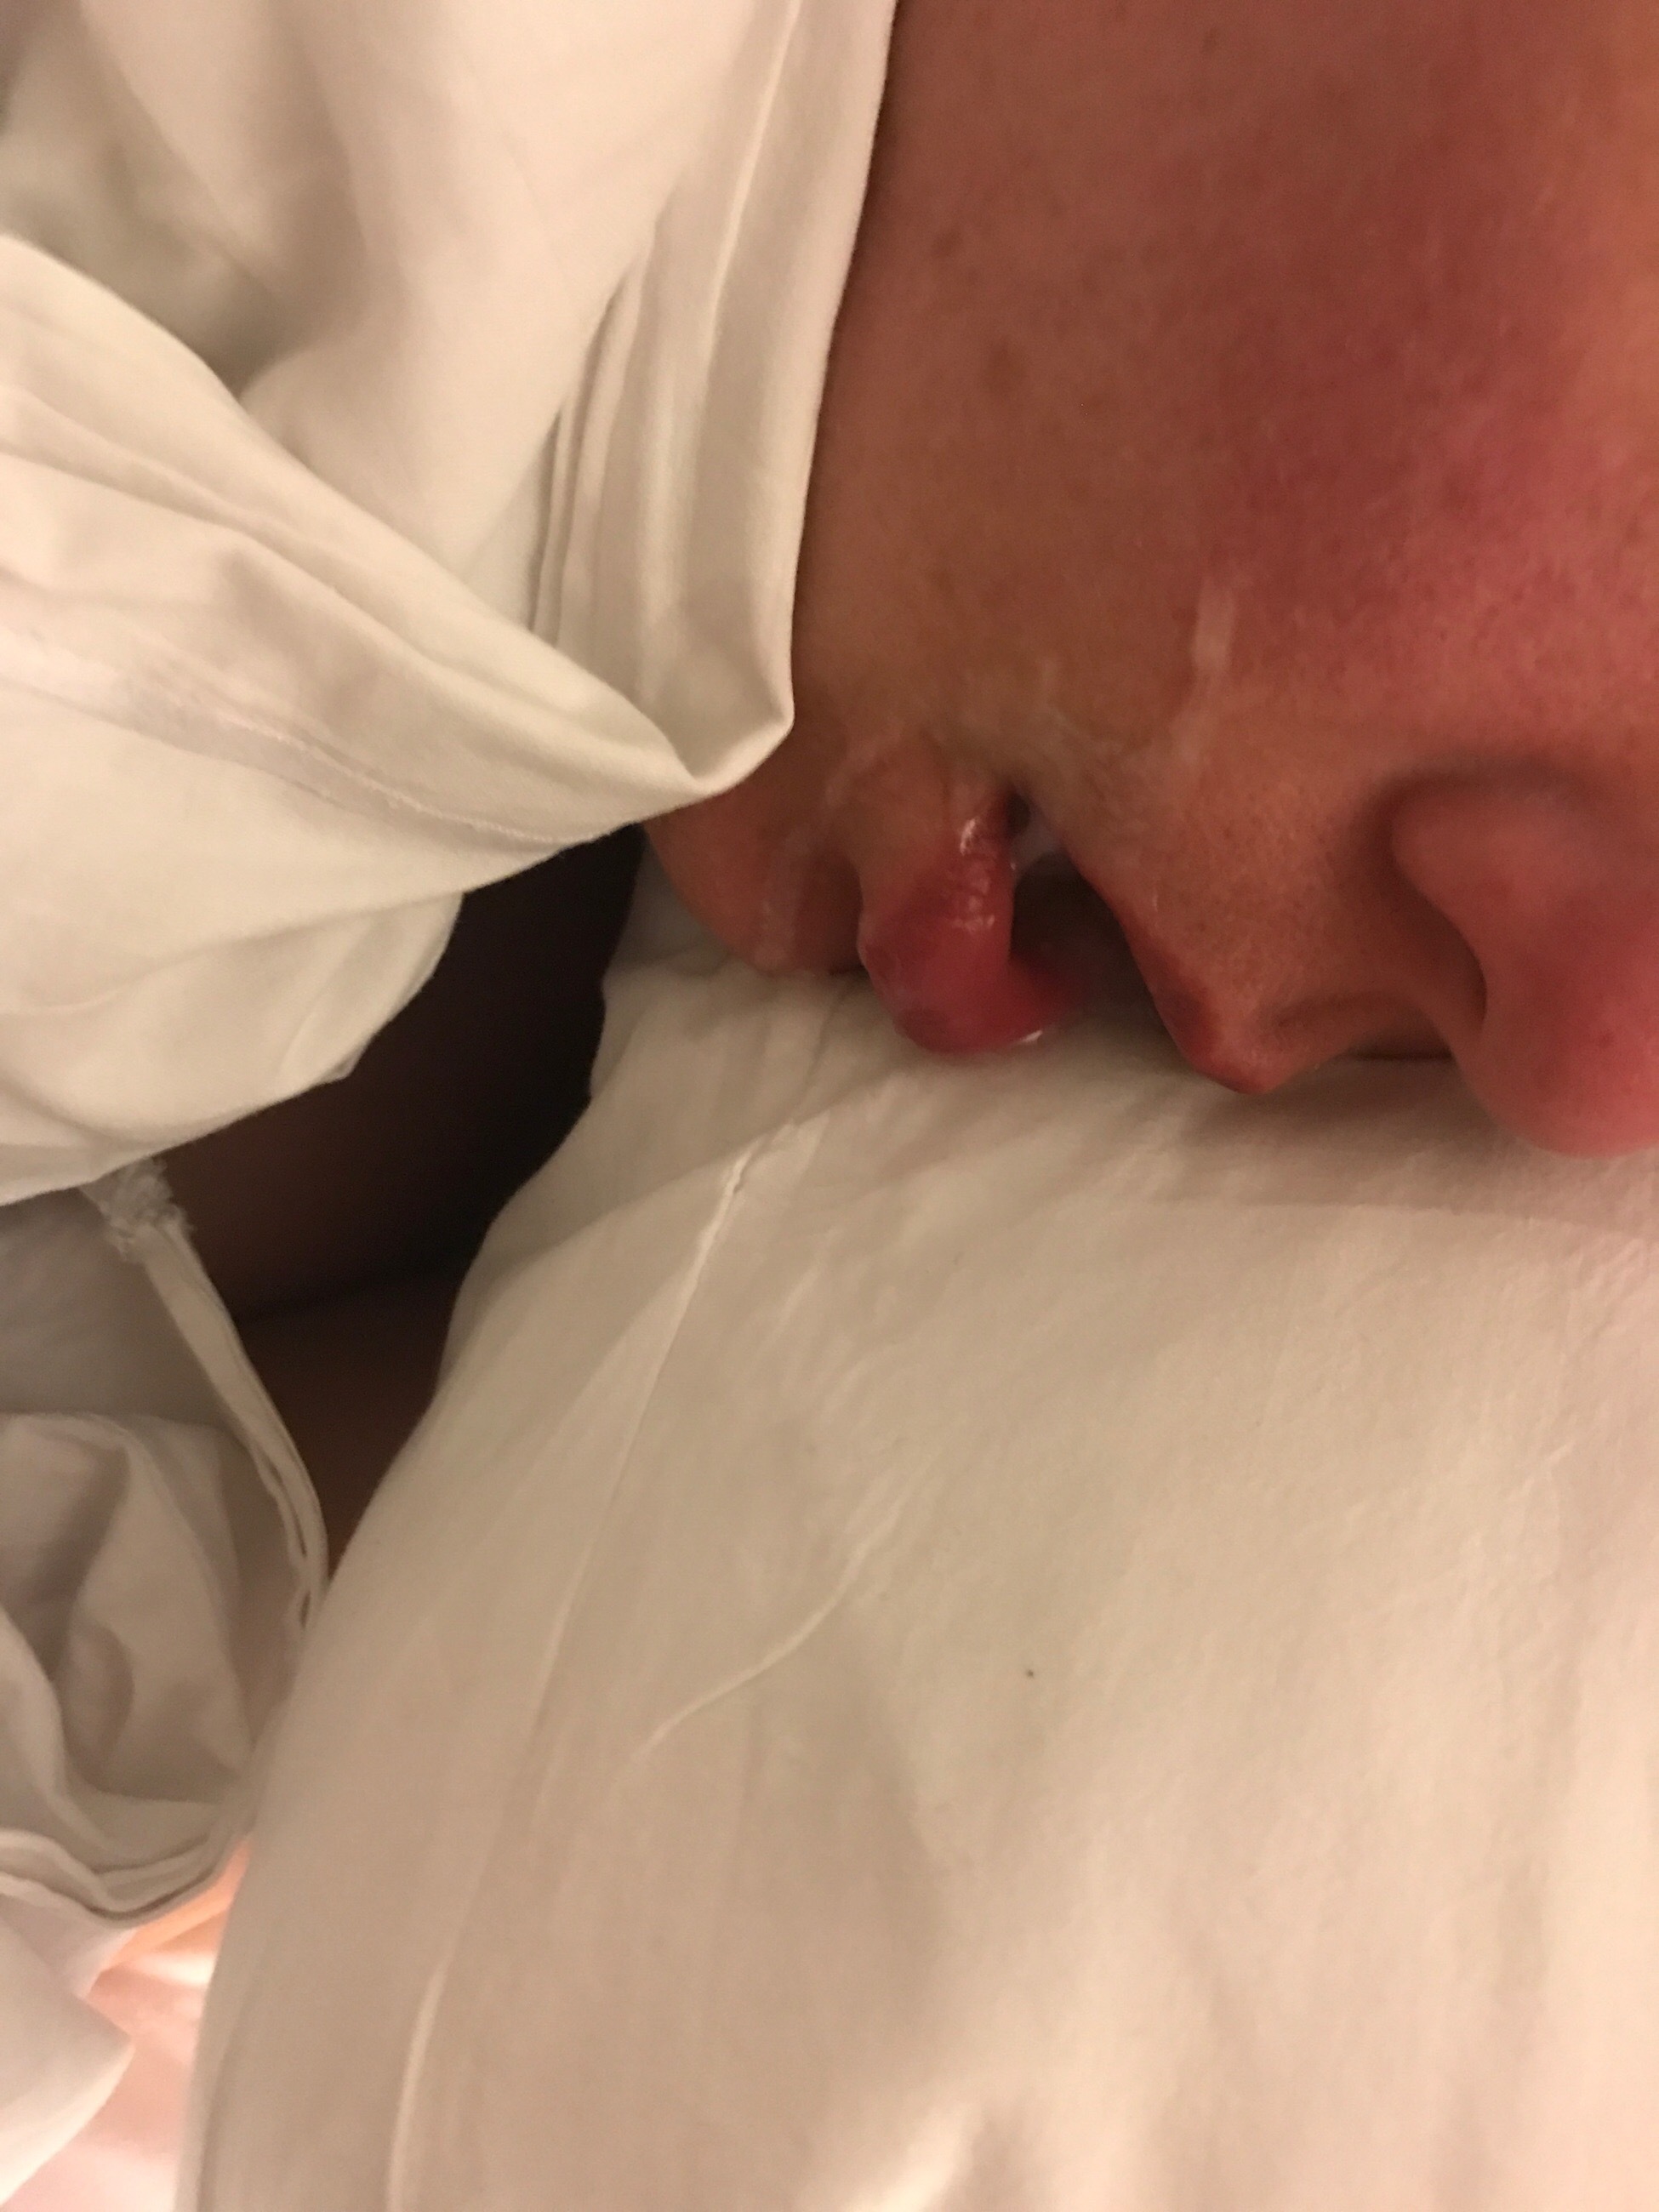 craig maynard recommends cum in mouth asleep pic